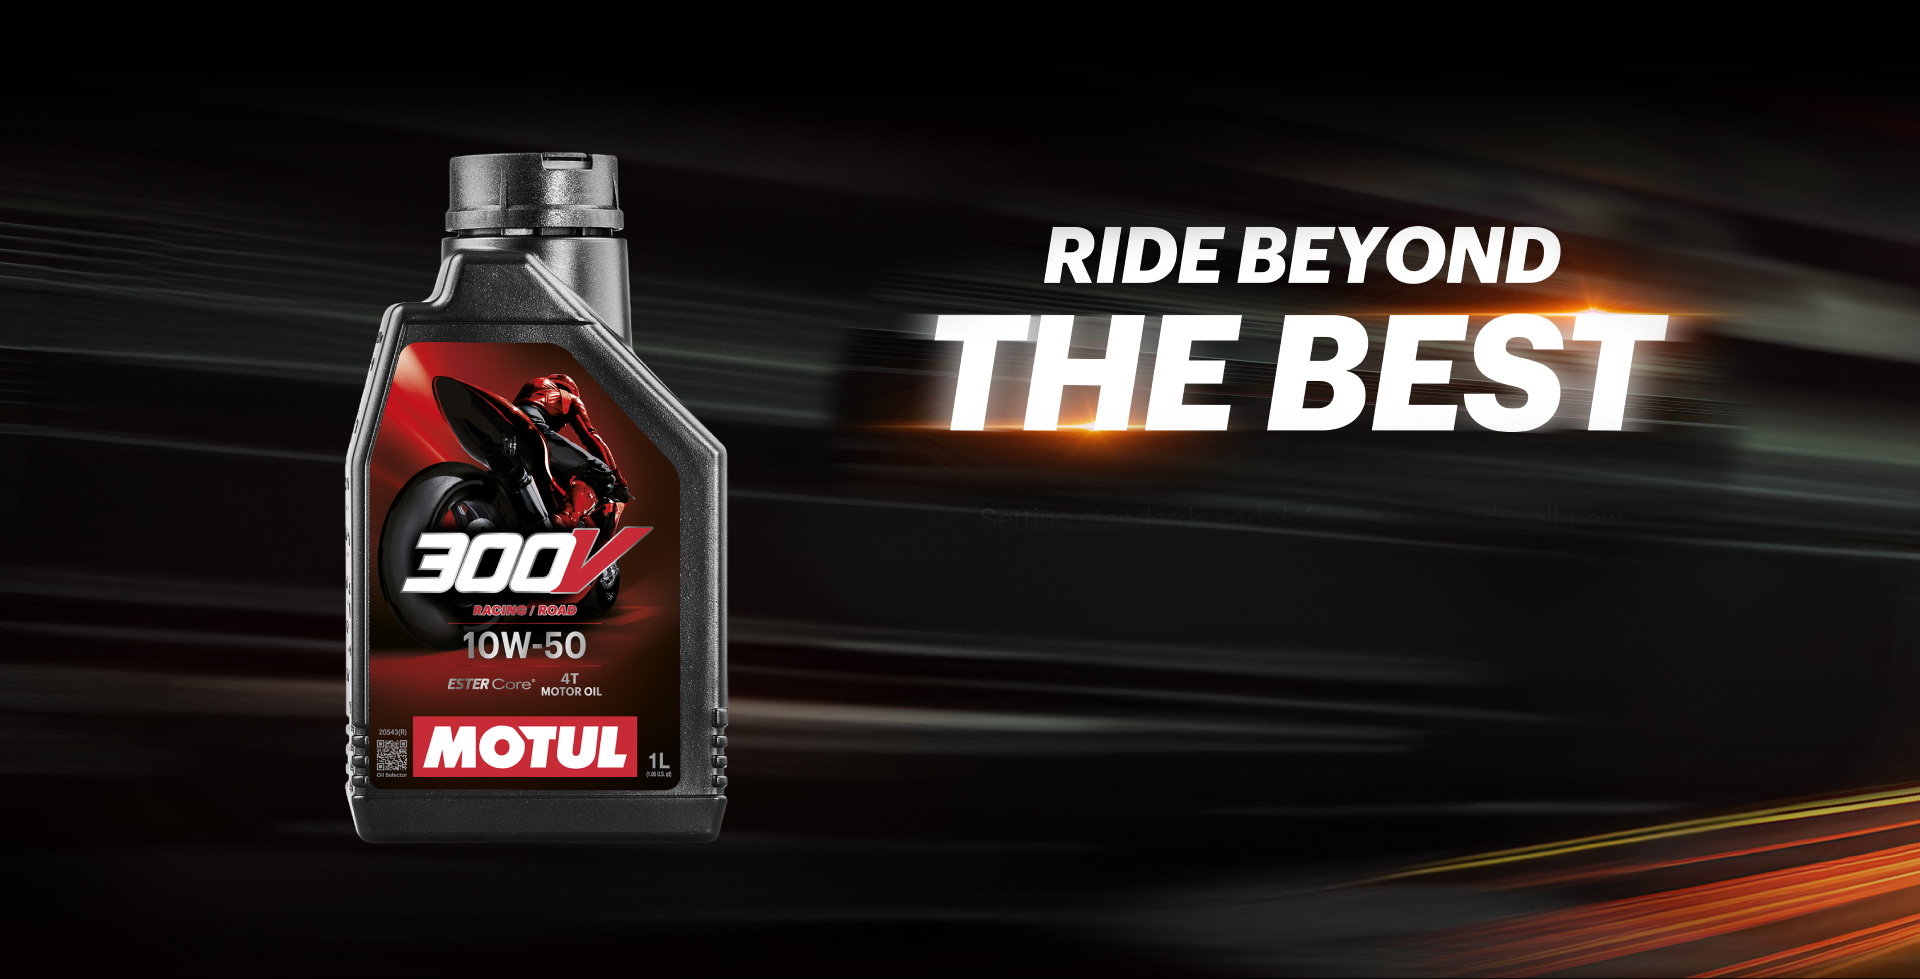 RIDE BEYOND THE BEST